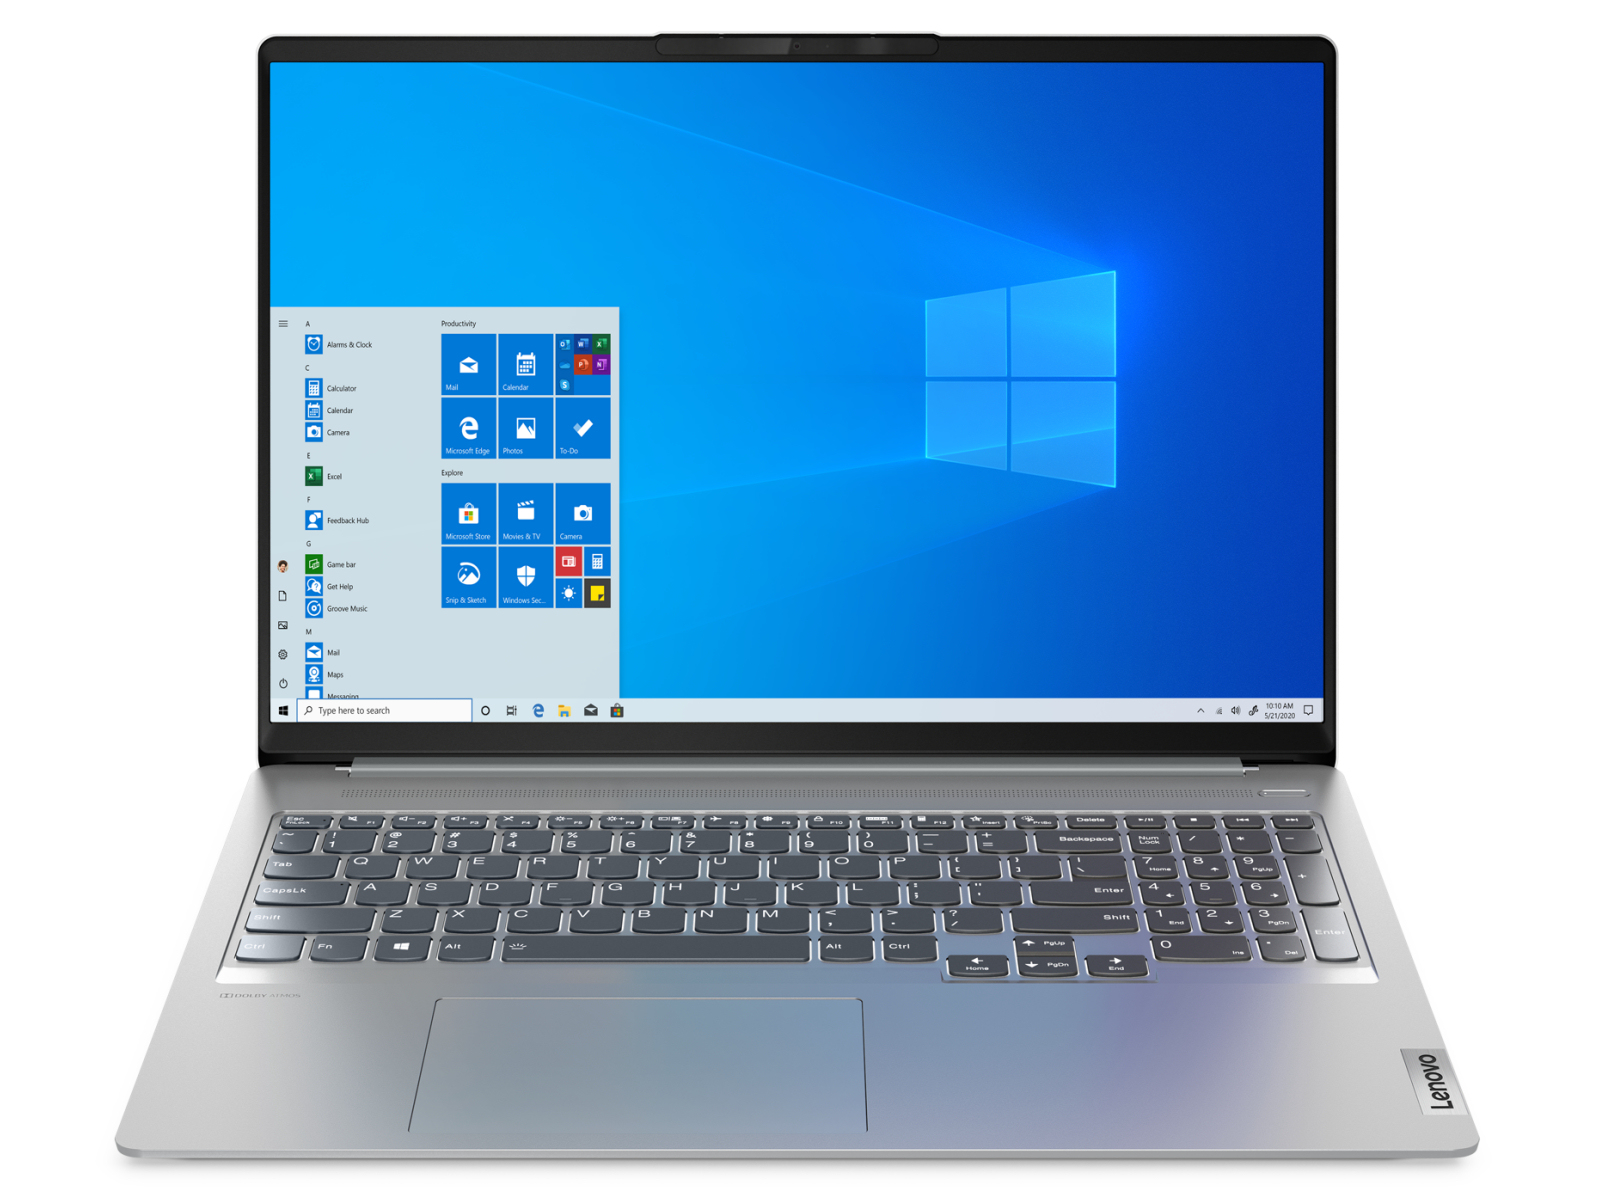 Lenovo Ideapad 5 Pro 16ihu6 In Review 16 Inch All Rounder With Good Battery Life Notebookcheck Net Reviews